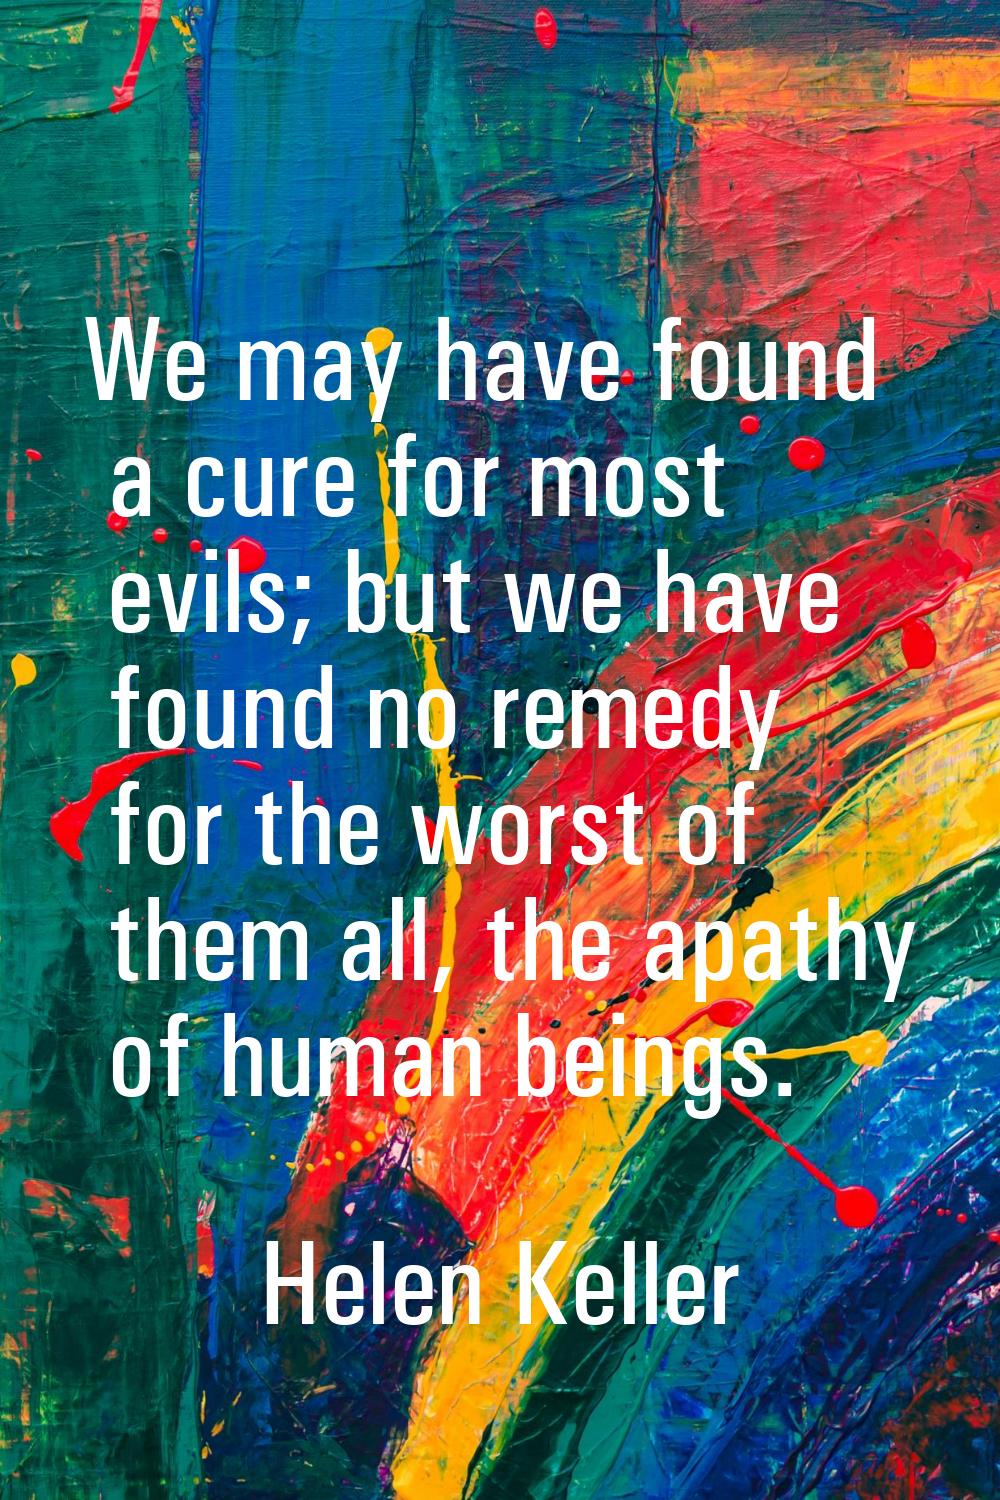 We may have found a cure for most evils; but we have found no remedy for the worst of them all, the